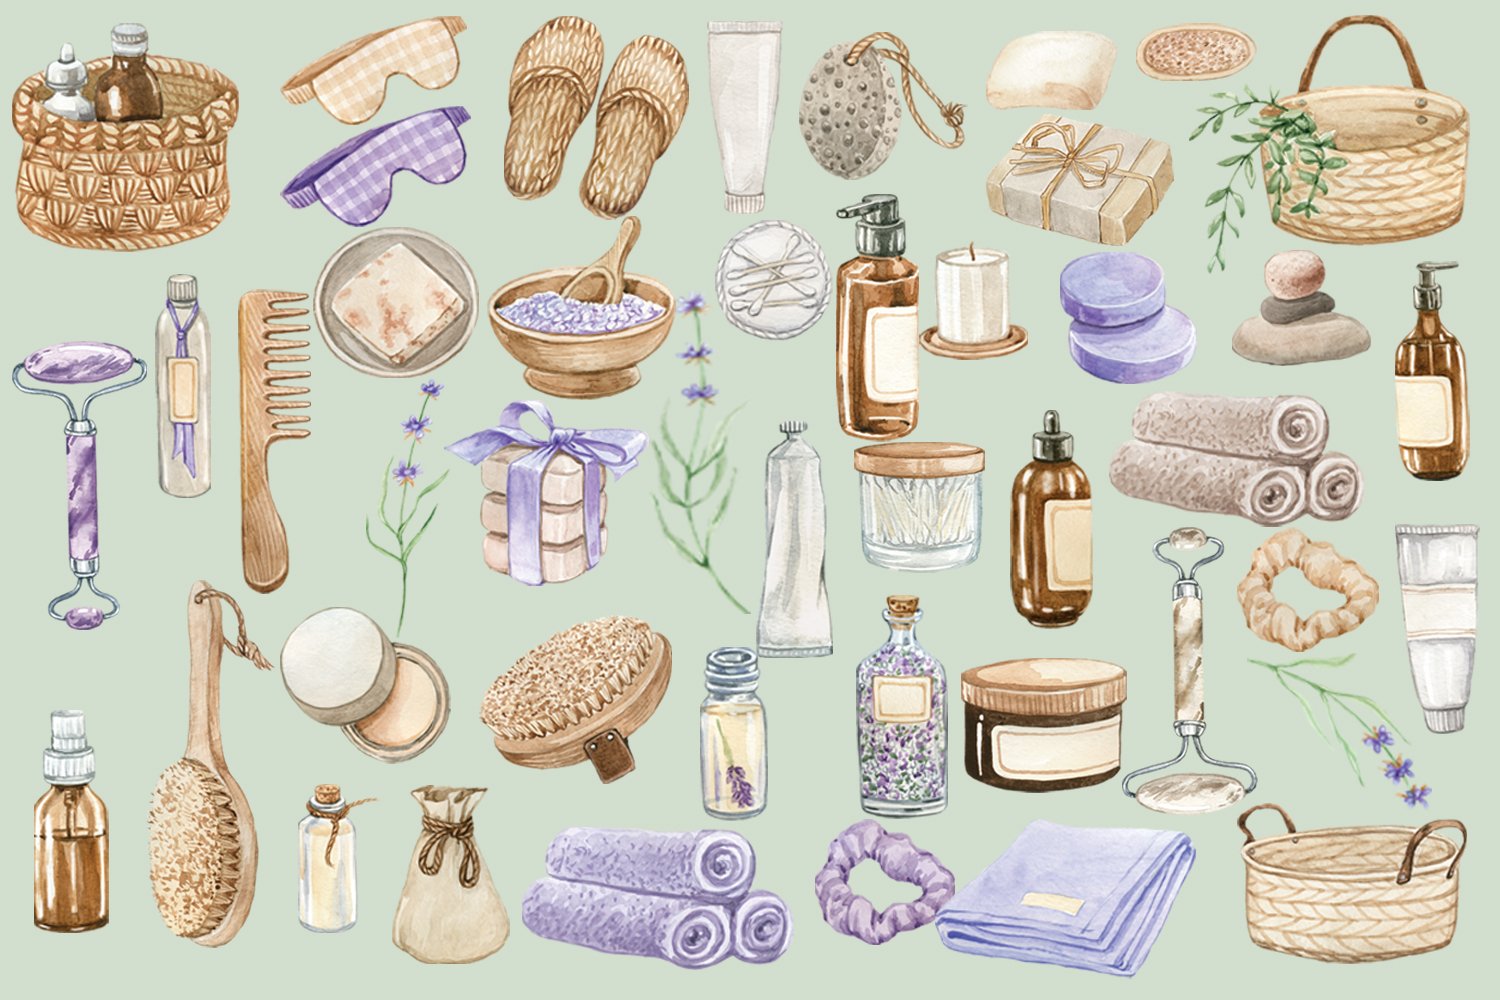 Cute spa elements on the light green background.